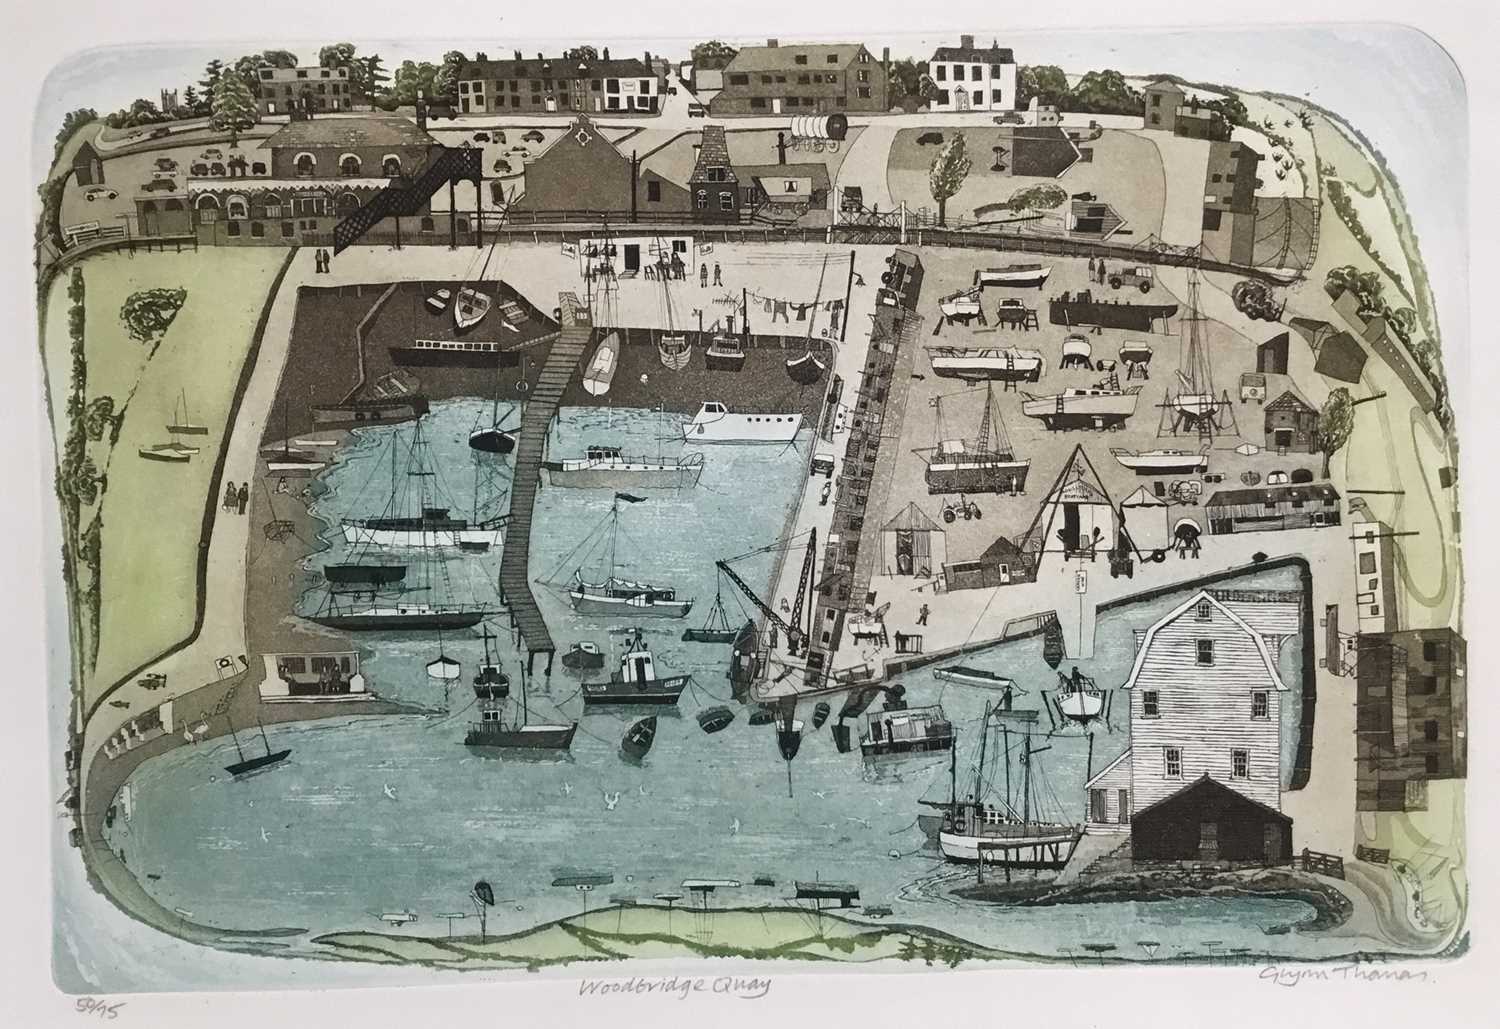 Lot 158 - Glyn Thomas (b. 1946) etching in colours, Woodbridge Quay, signed and numbered 59/75, 26 x 39cm